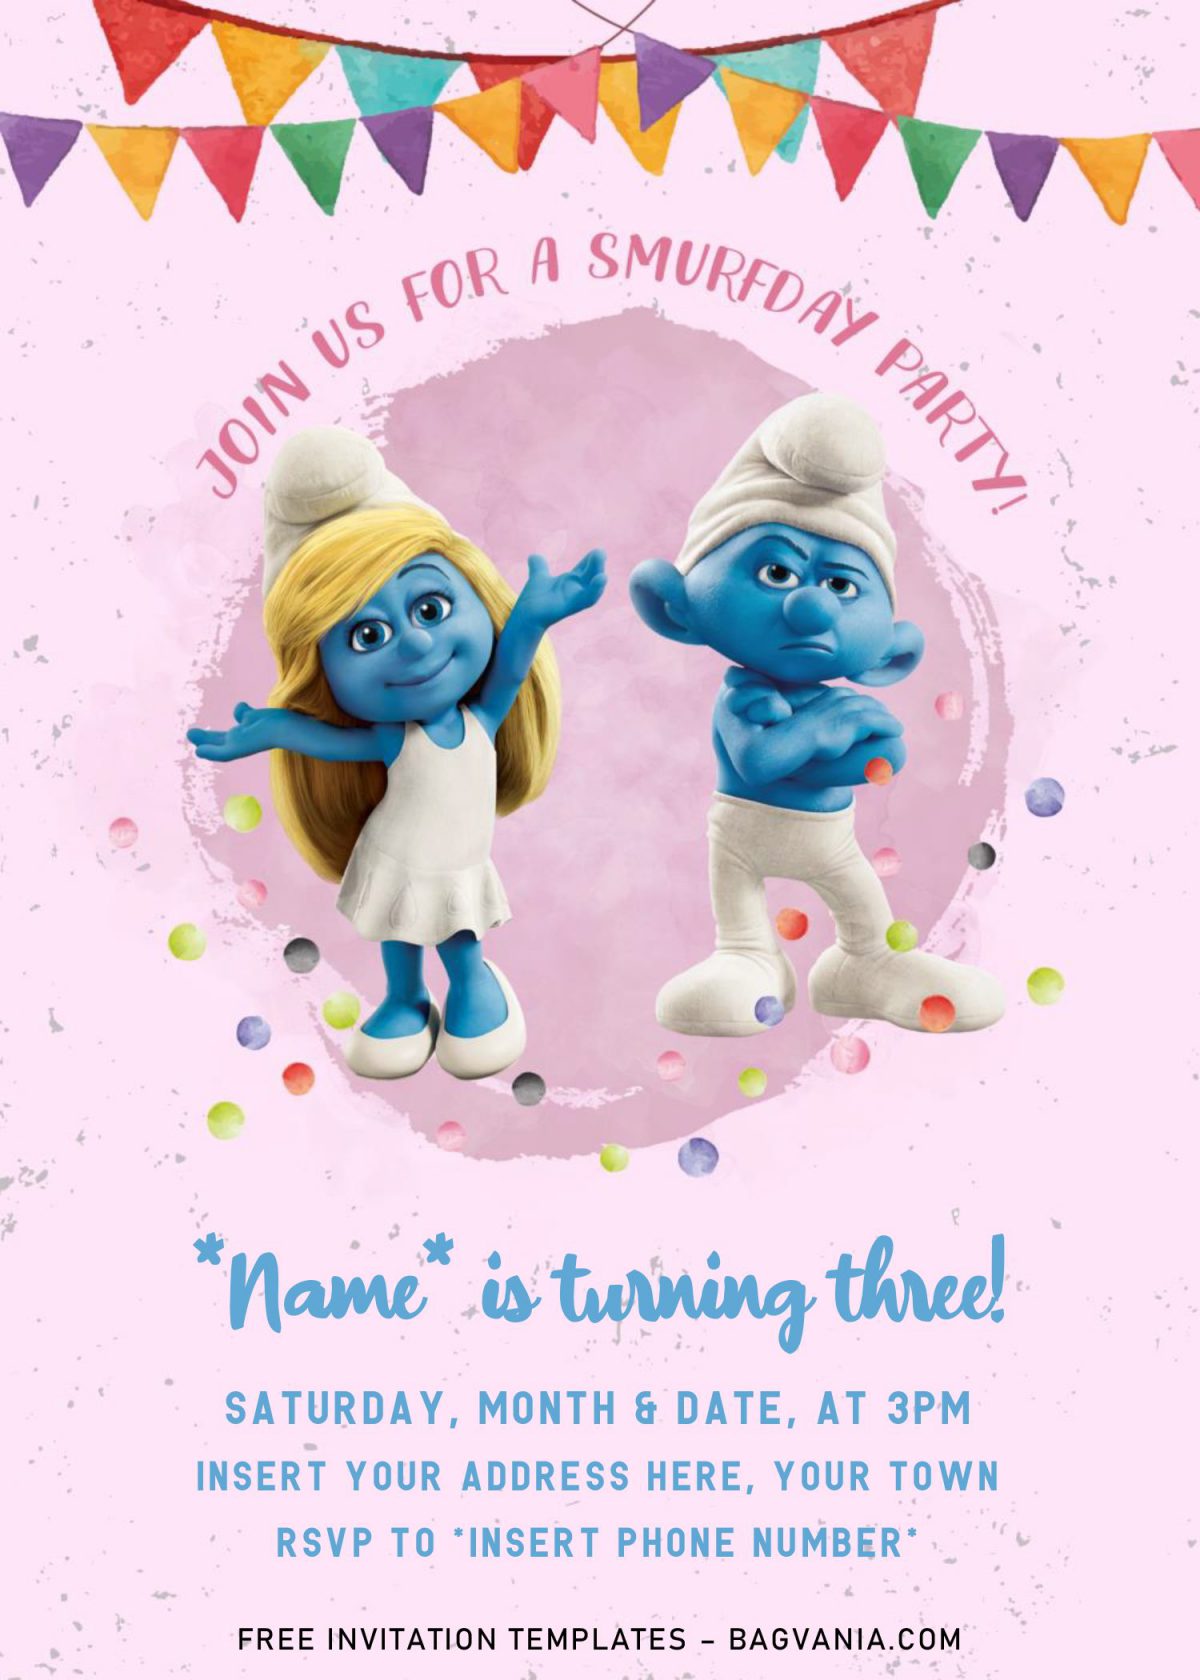 Free Smurf Birthday Invitation Templates For Free and has Smurfette and Brainy Smurf